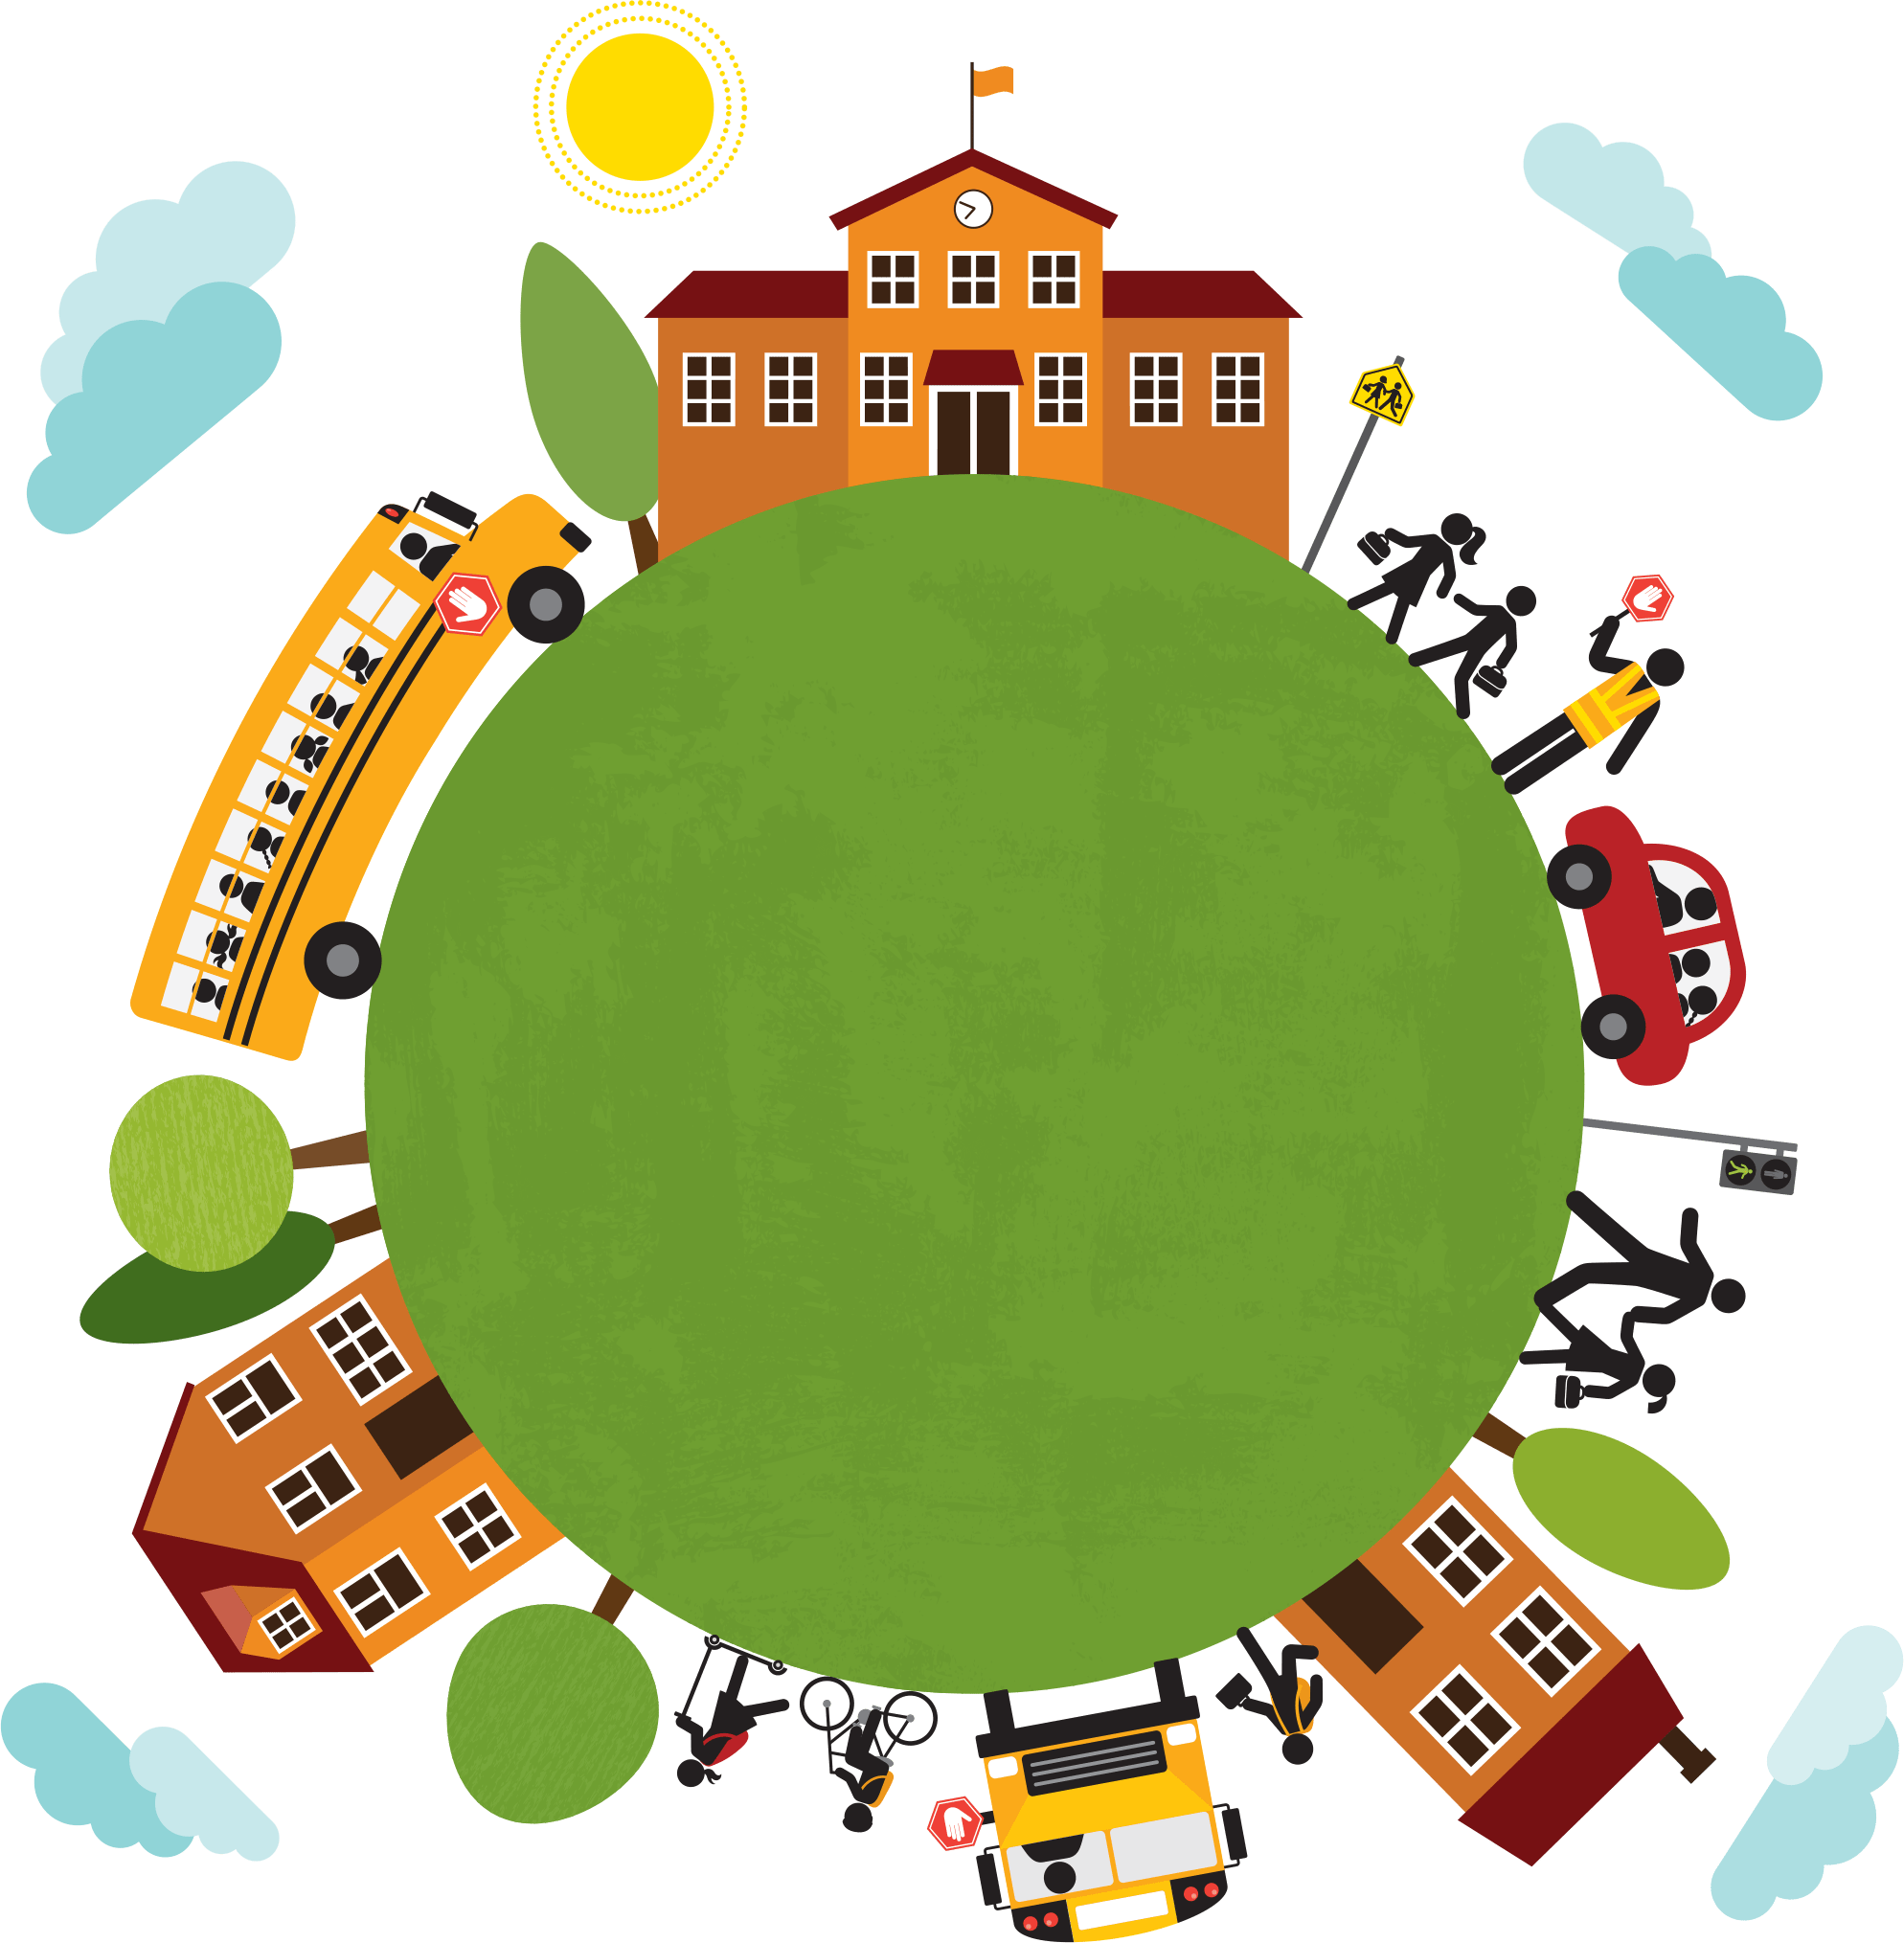 schools and buses on earth vector illustration